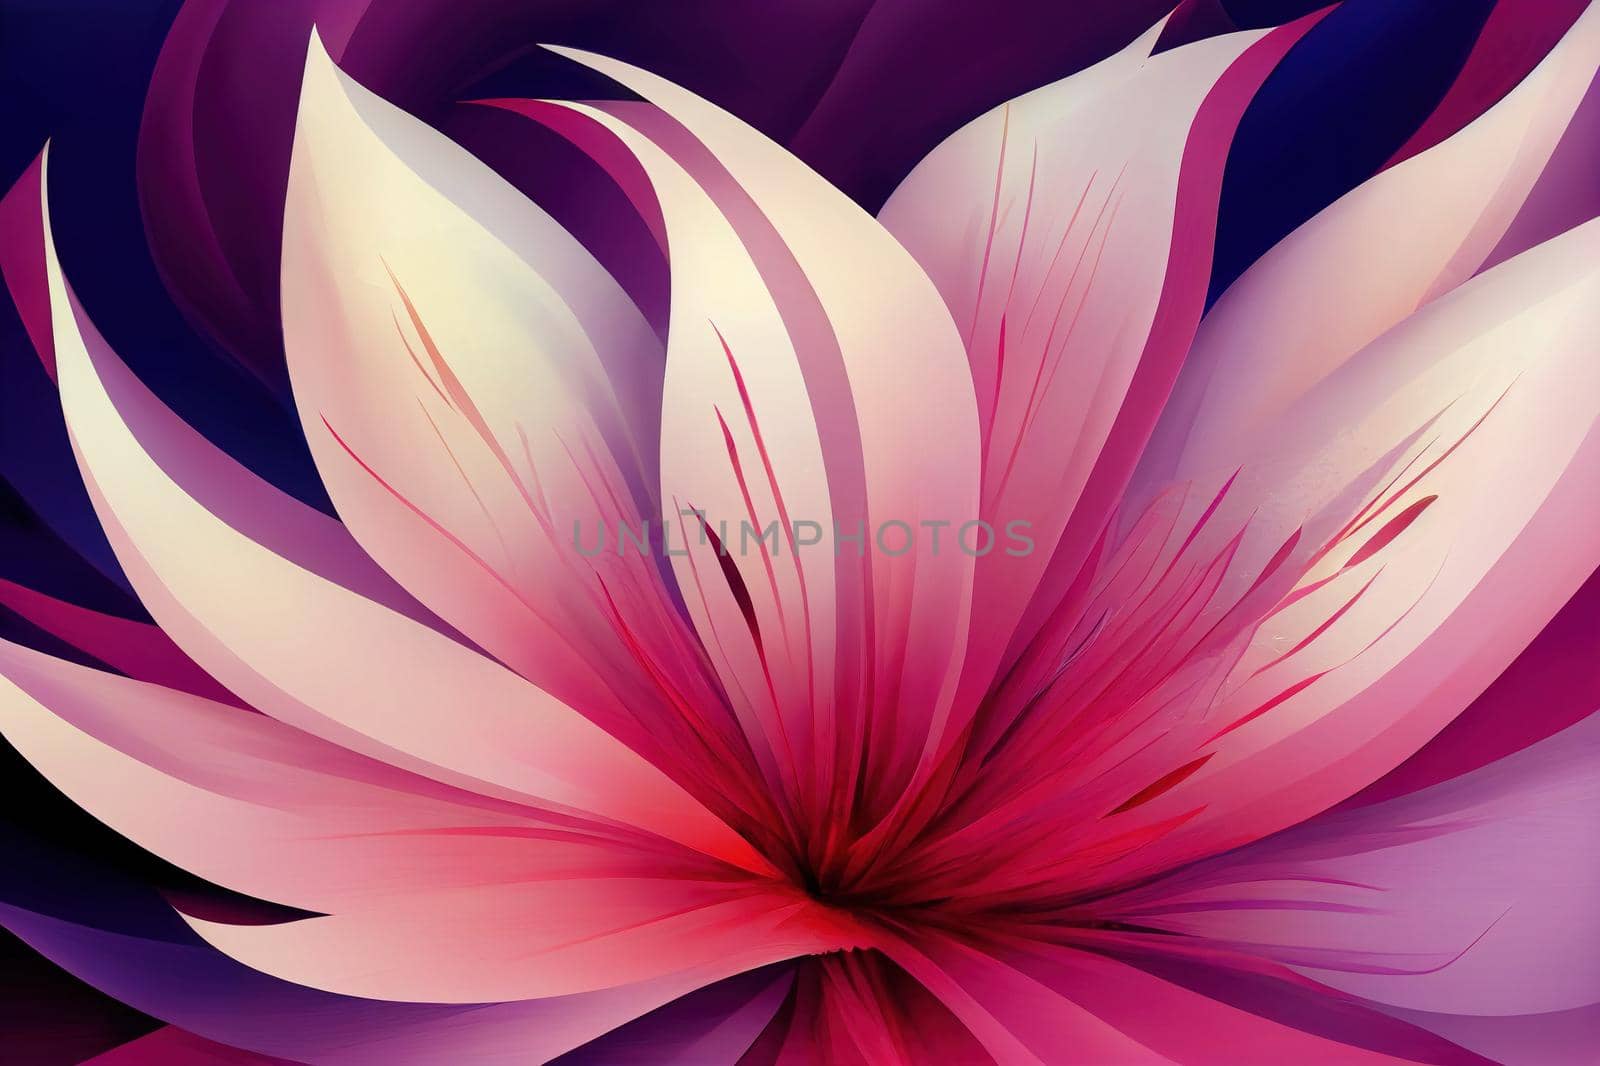 Abstract flower Female floral background 2d illustration by 2ragon